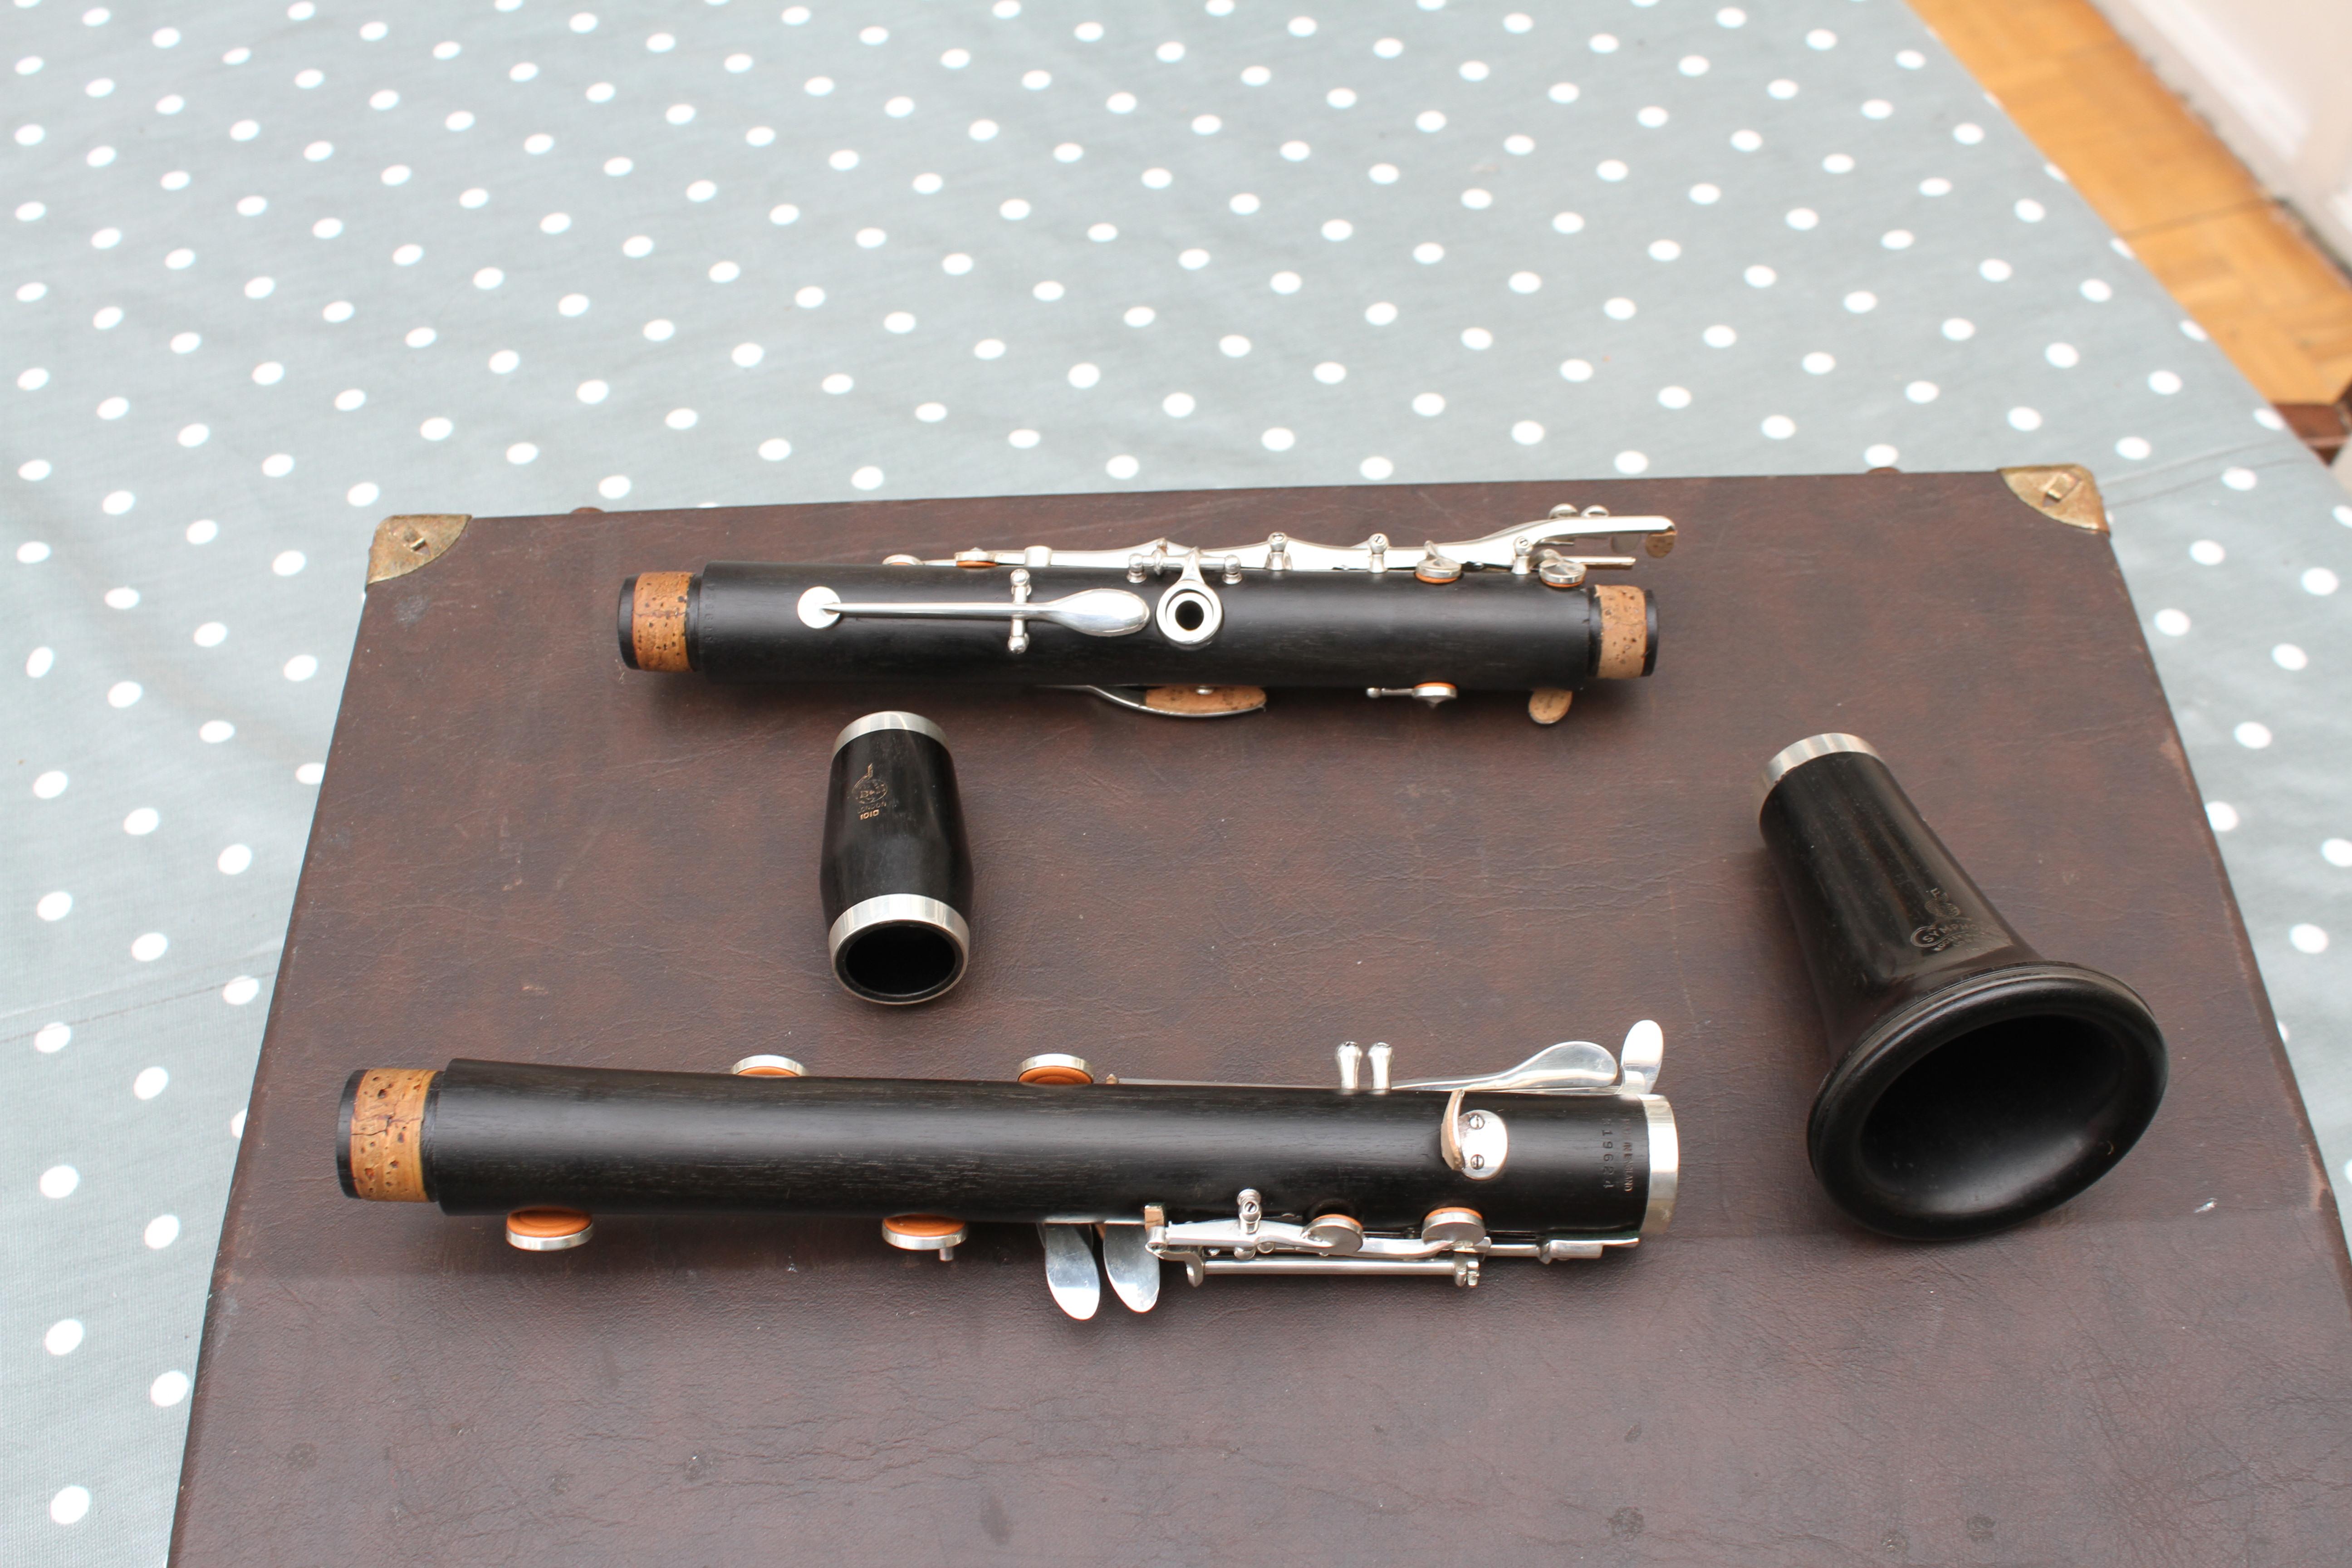 Boosey and hawkes 1010 clarinet serial numbers